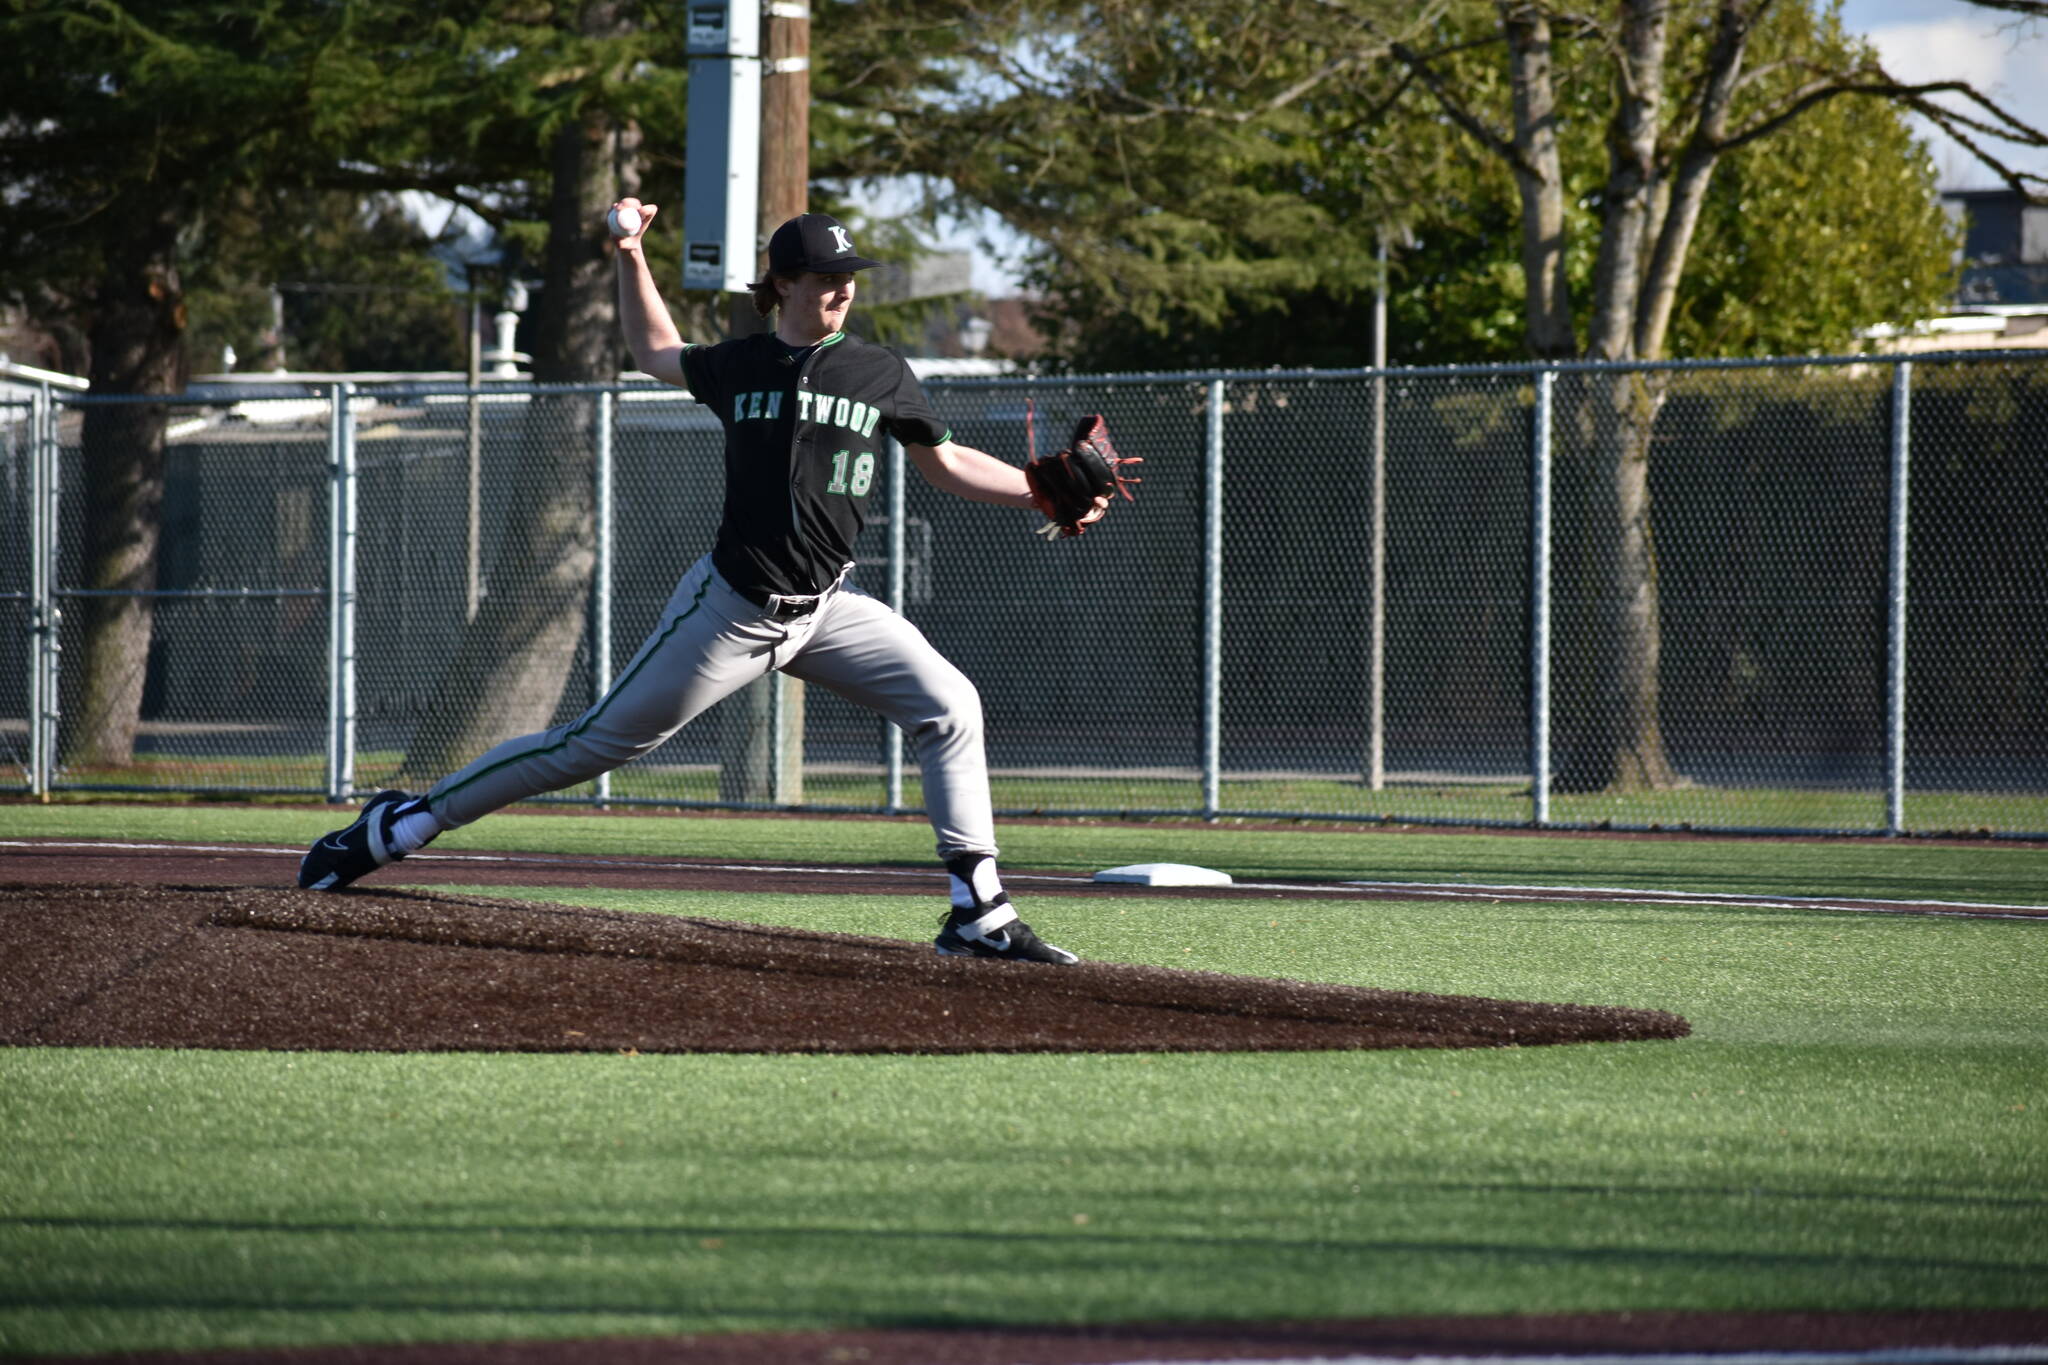 Kentwood’s starting pitcher Tyler Maurer faces Liberty on March 14. Ben Ray / The Reporter